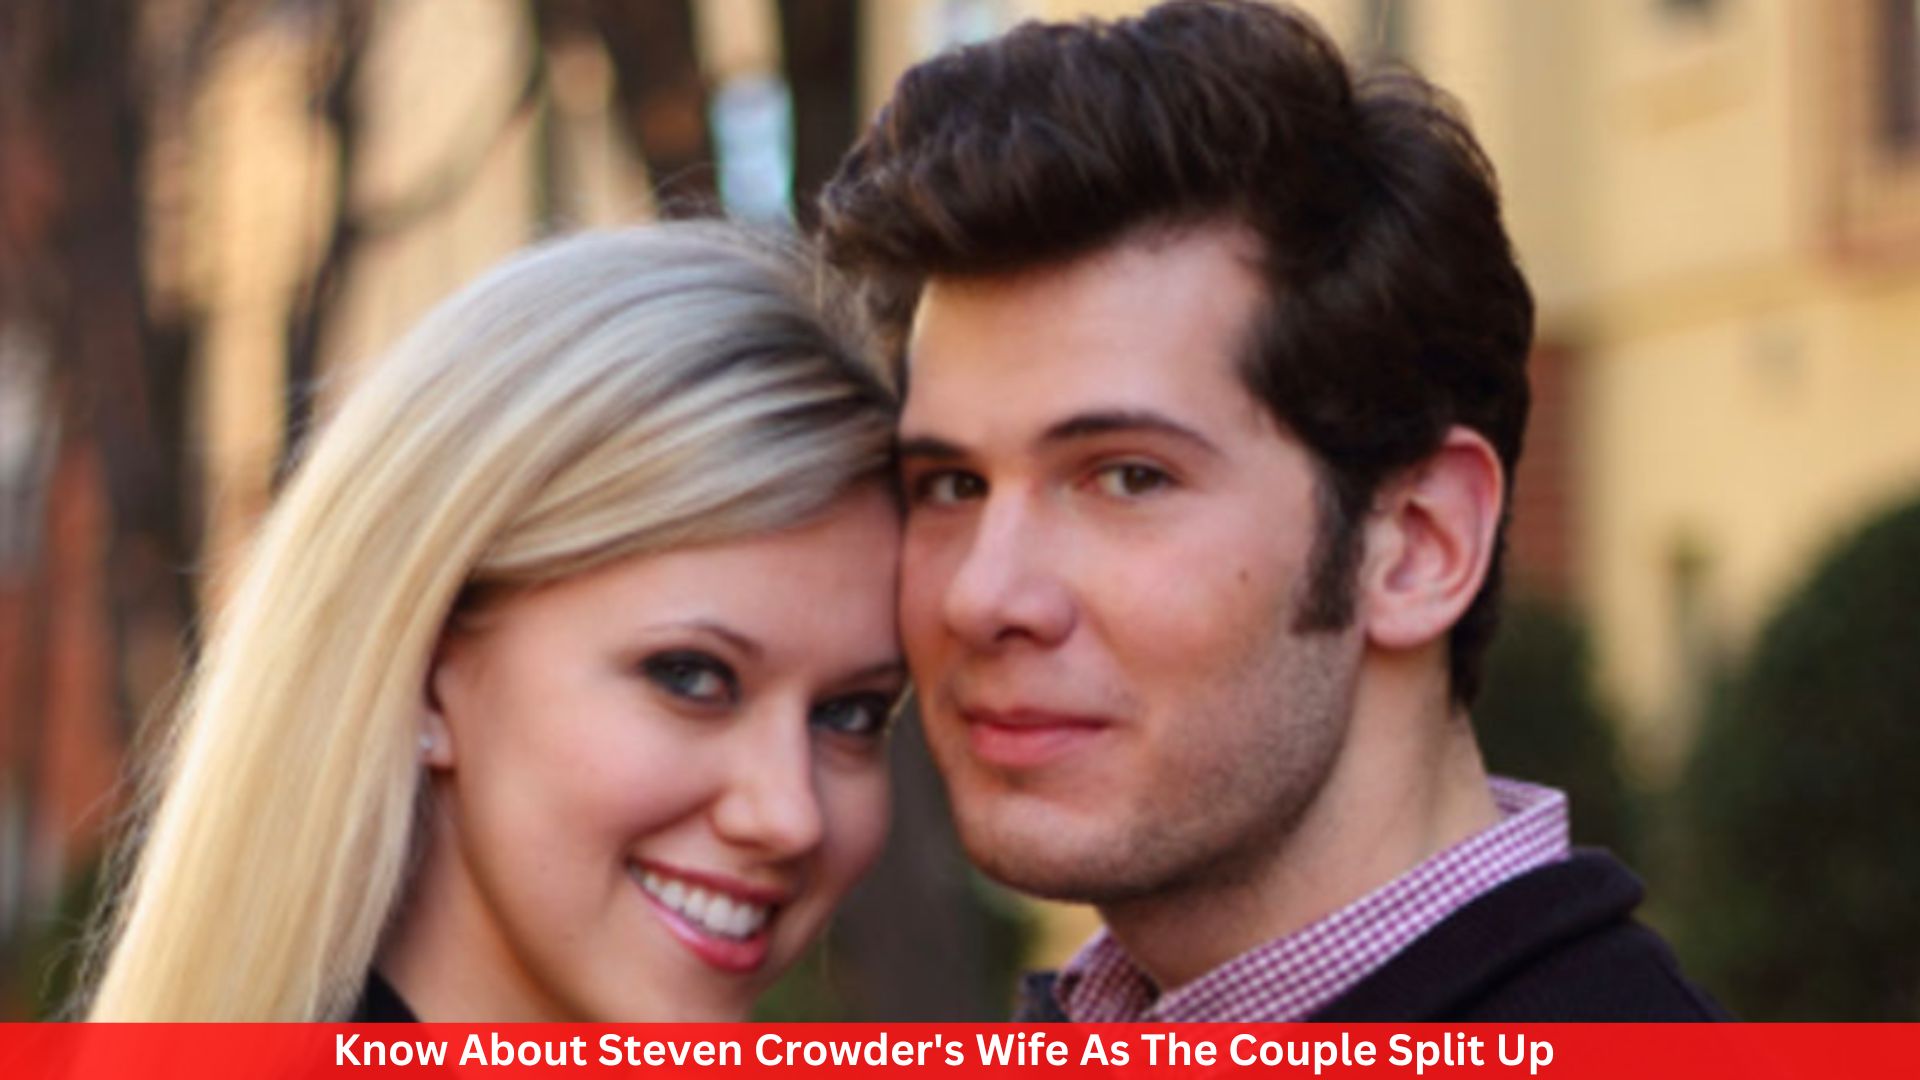 Know About Steven Crowder's Wife As The Couple Split Up